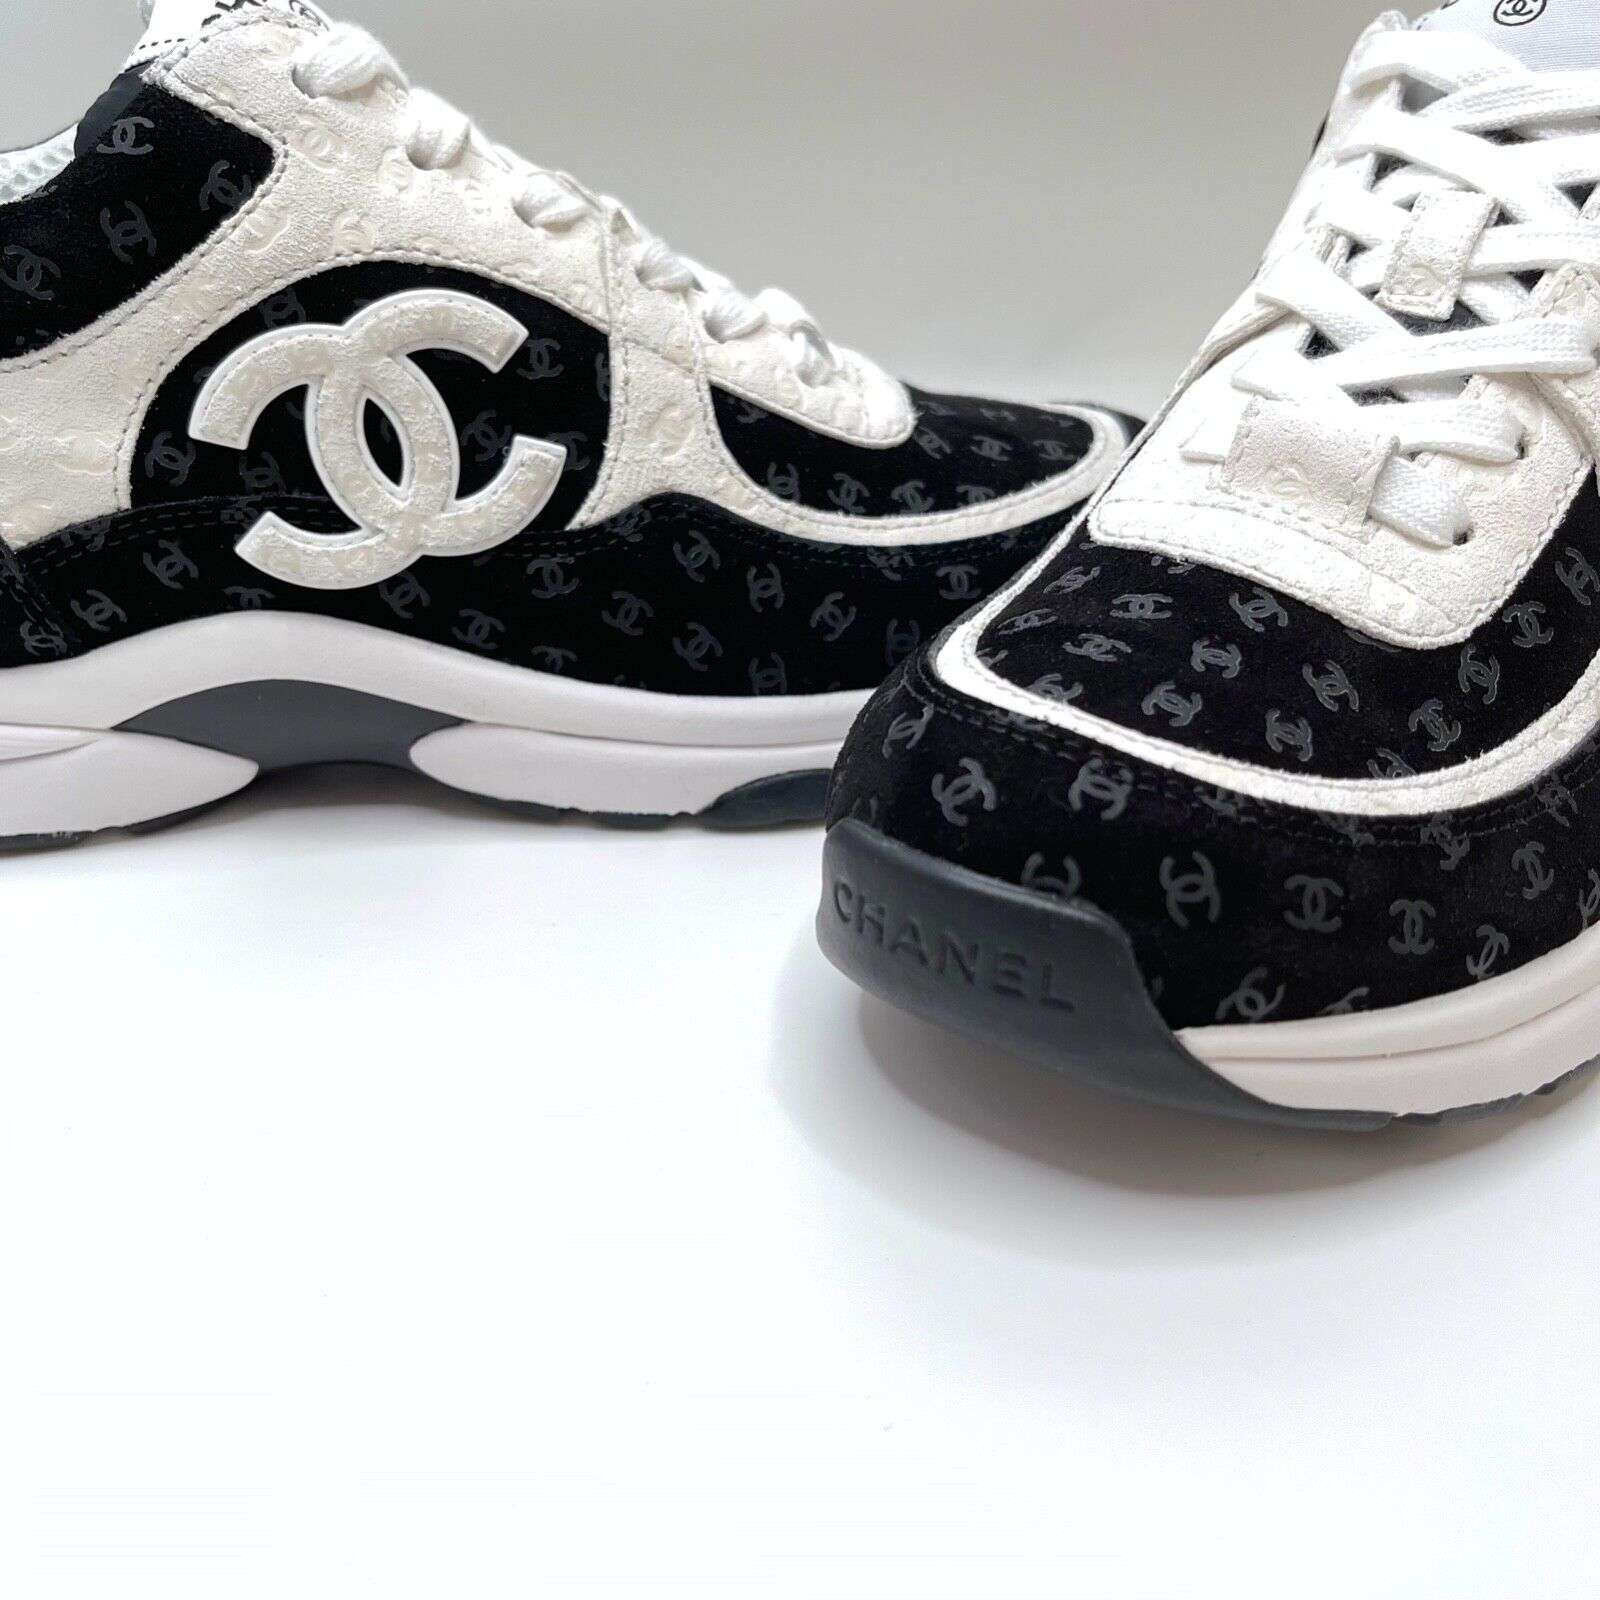 🔥 Chanel Black White CC Logo 40 EUR Size Suede Lace Ups Runners ...